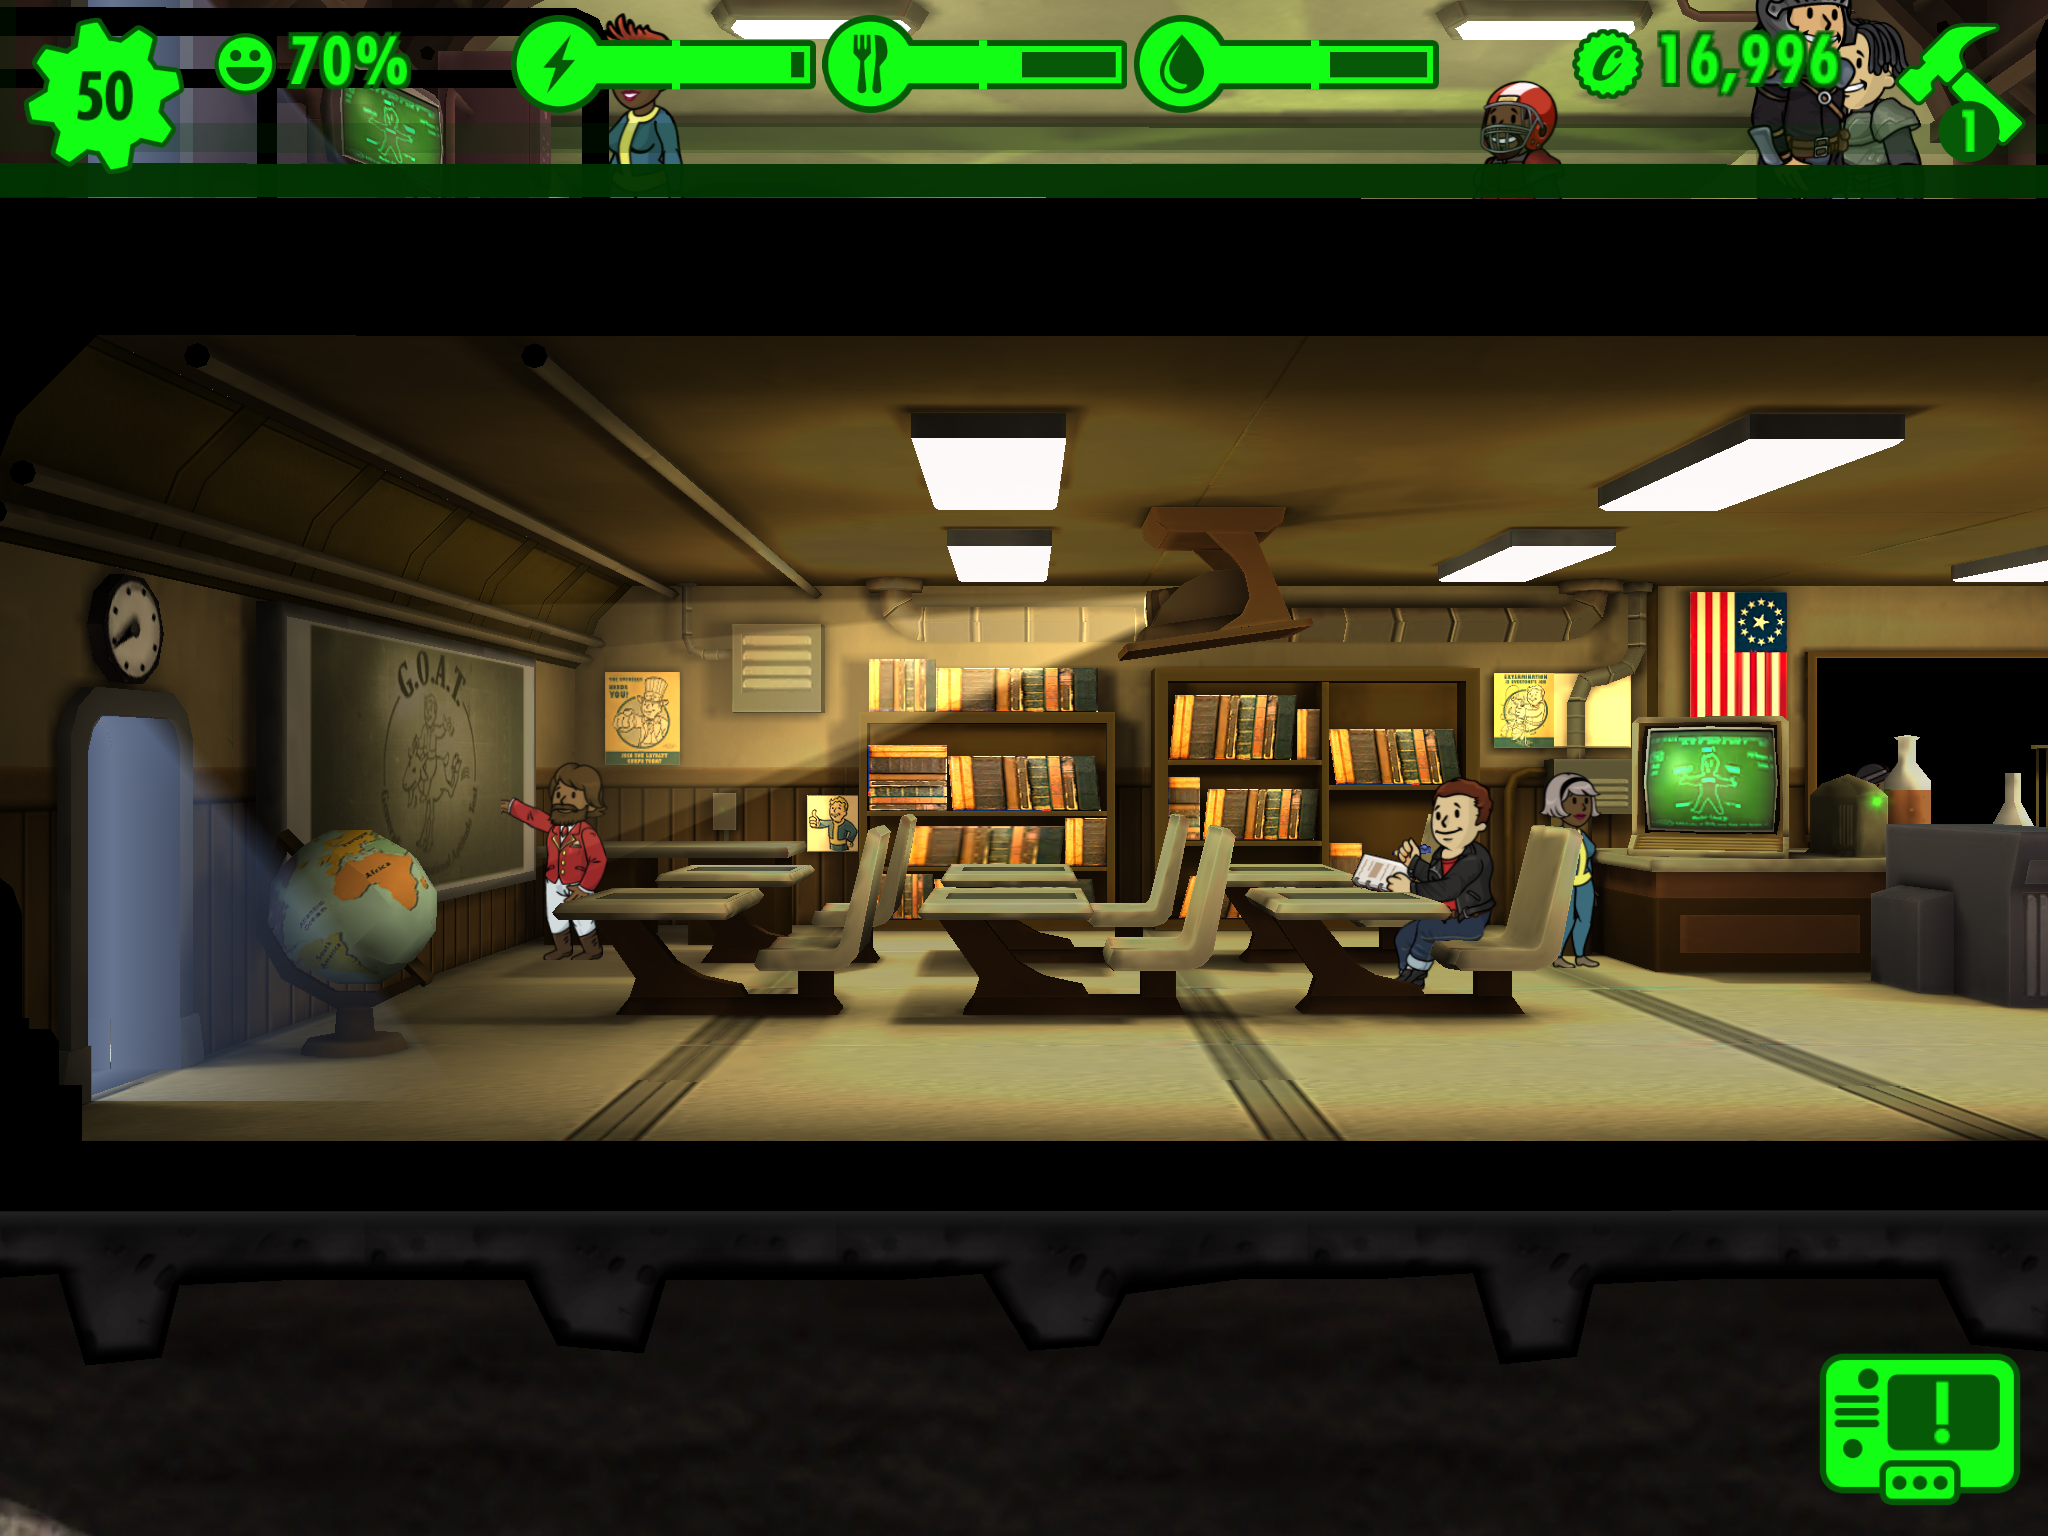 upcoming fallout shelter updates